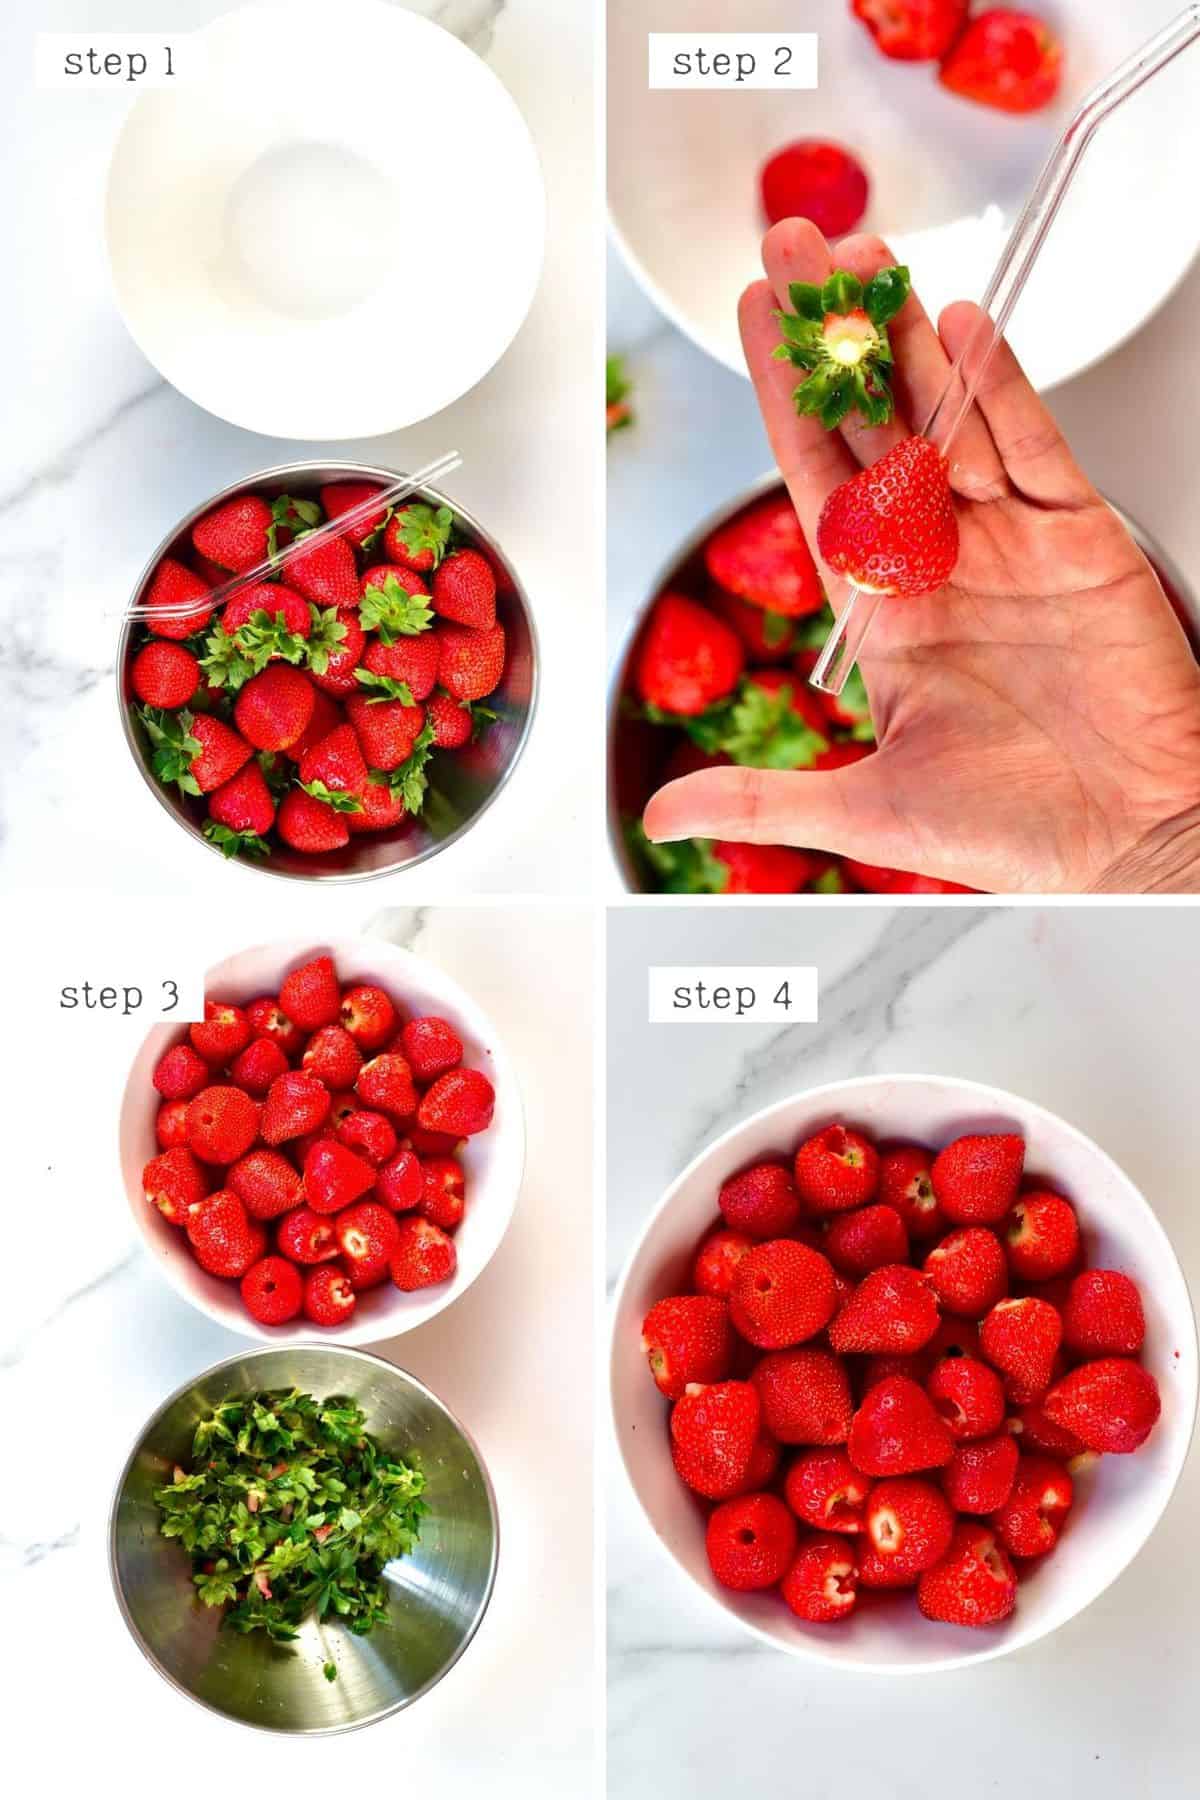 Steps for coring strawberries